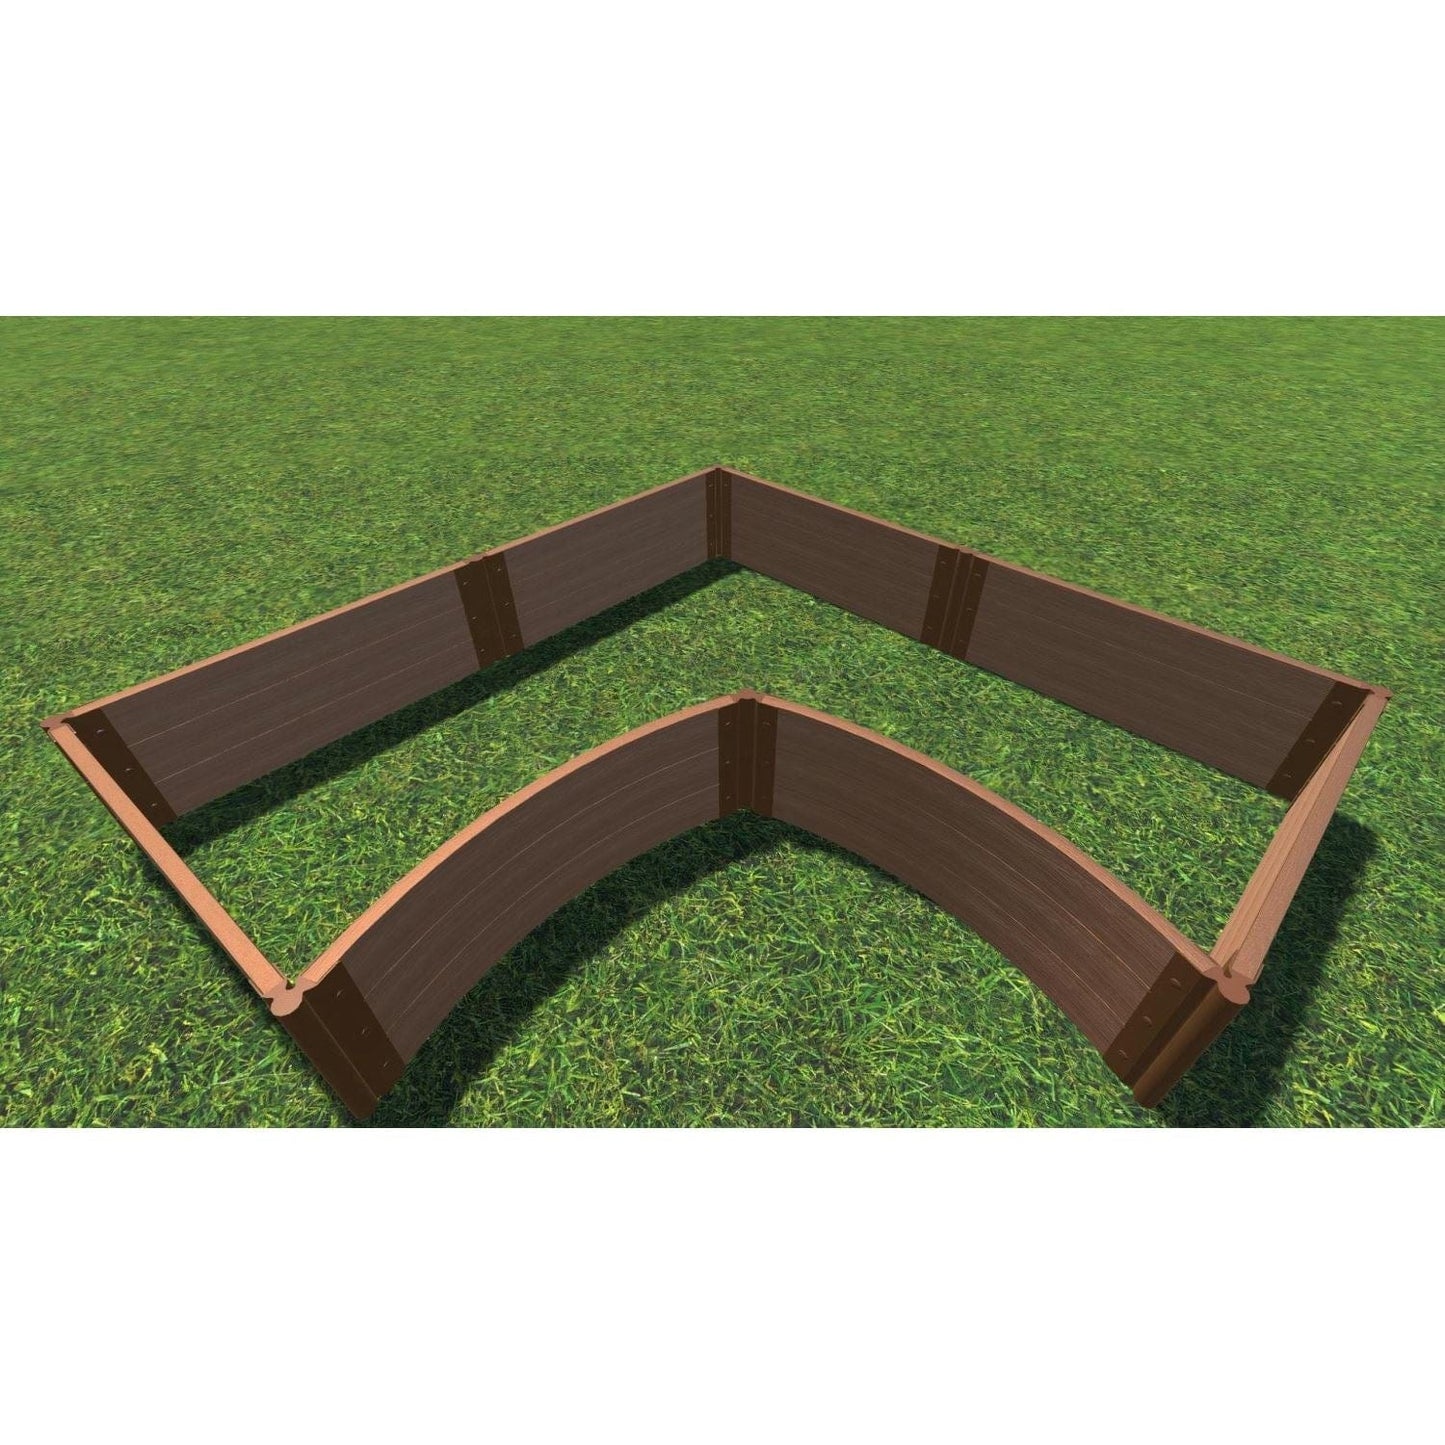 Frame It All Gardening Accessories 2" Frame It All | Tool-Free Grand Concourse Interior Curved Corner Raised Garden Bed 8' X 8' X 16.5" - Classic Sienna 800003029